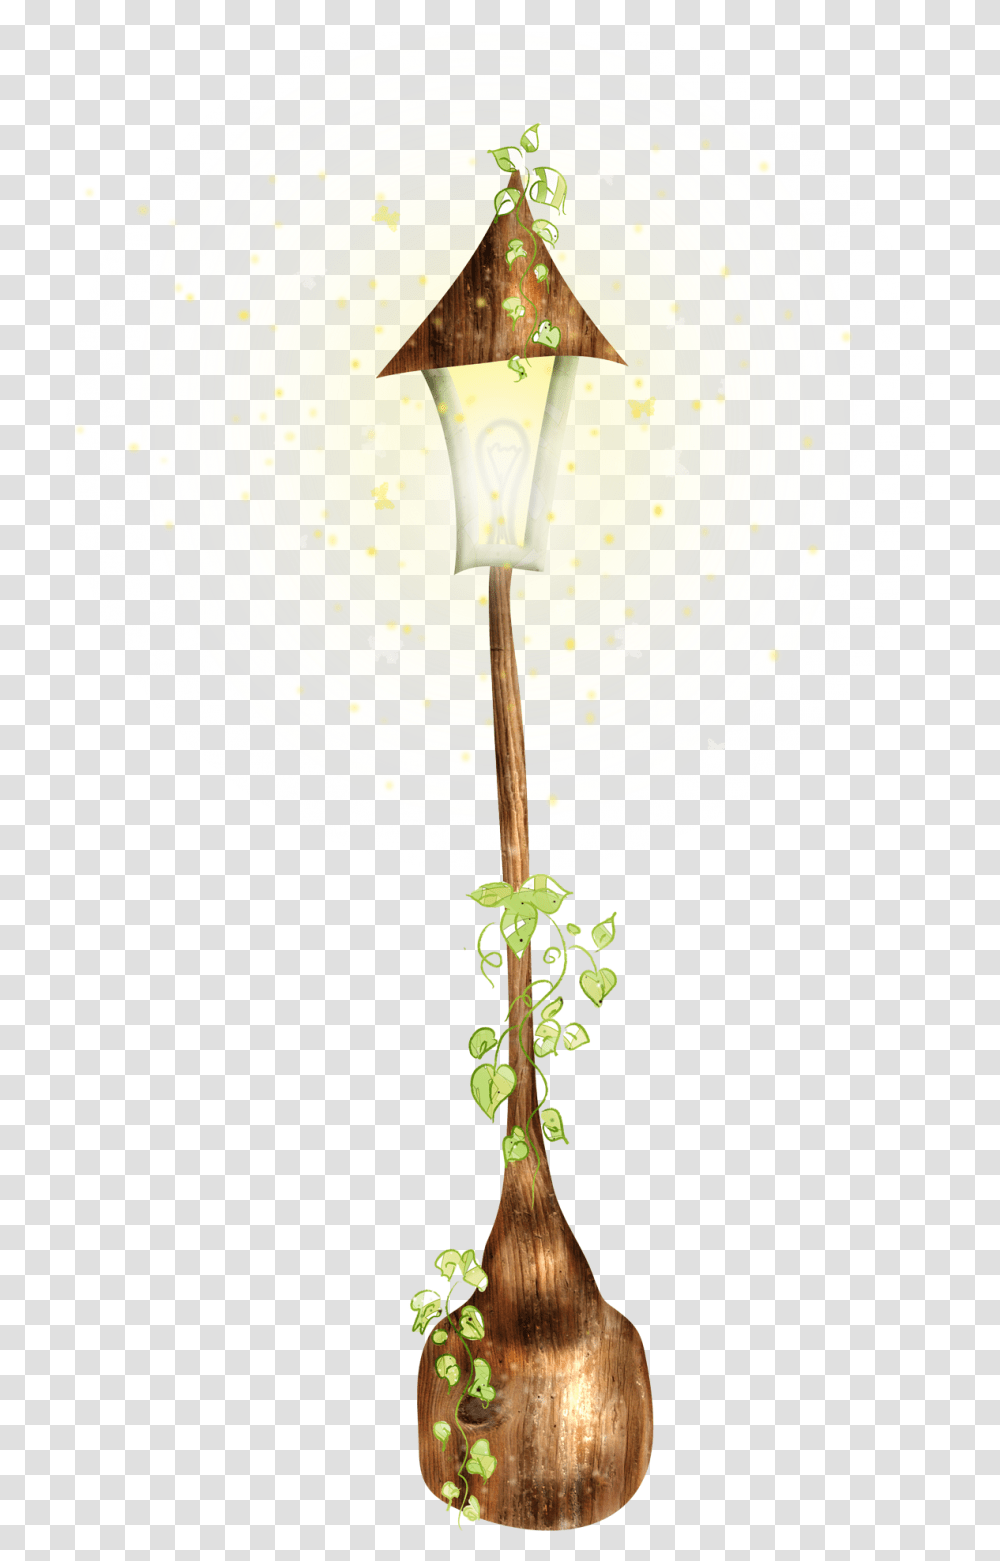 Fairy Lights Free Hq Image Clipart Christmas Lights, Lamp, Paper, Broom, Lampshade Transparent Png